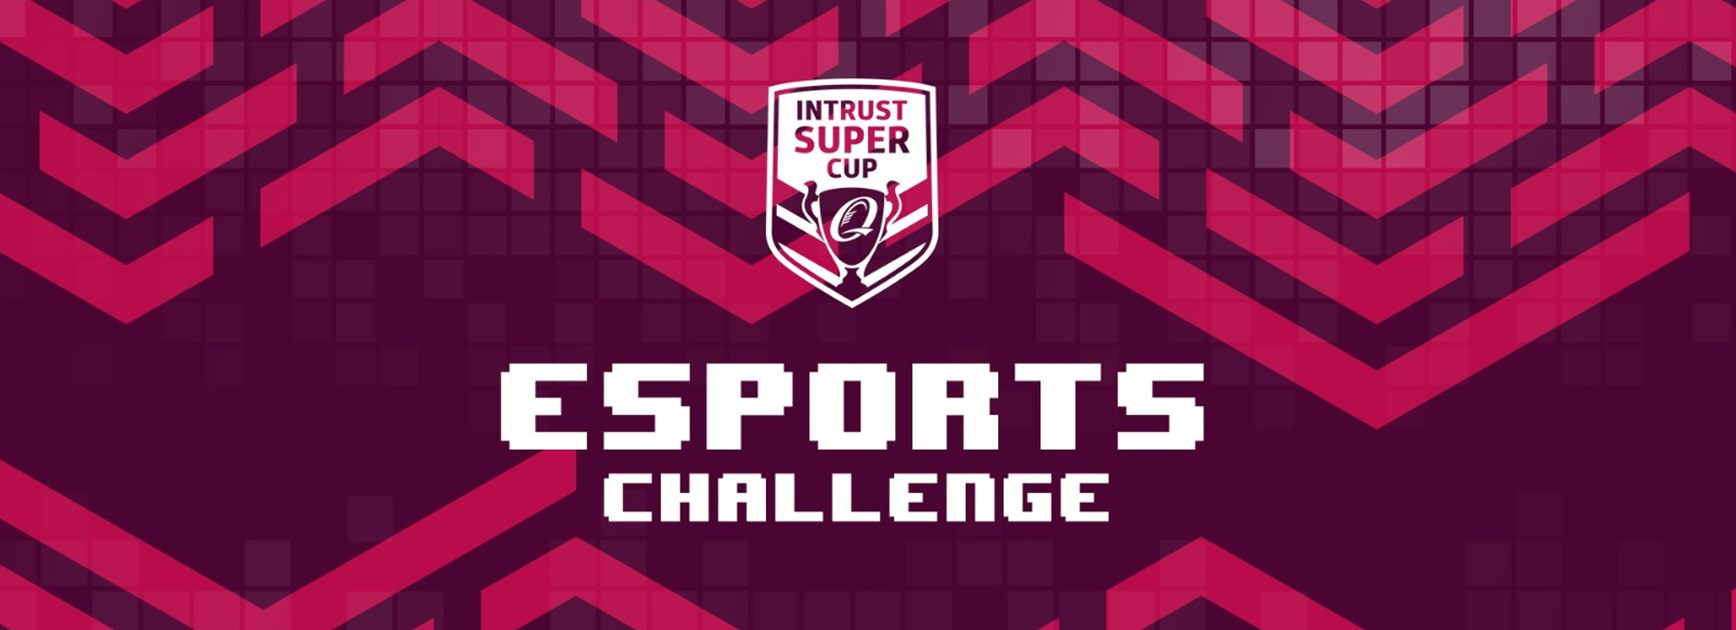 Maroons All Stars lead E-sports Challenge